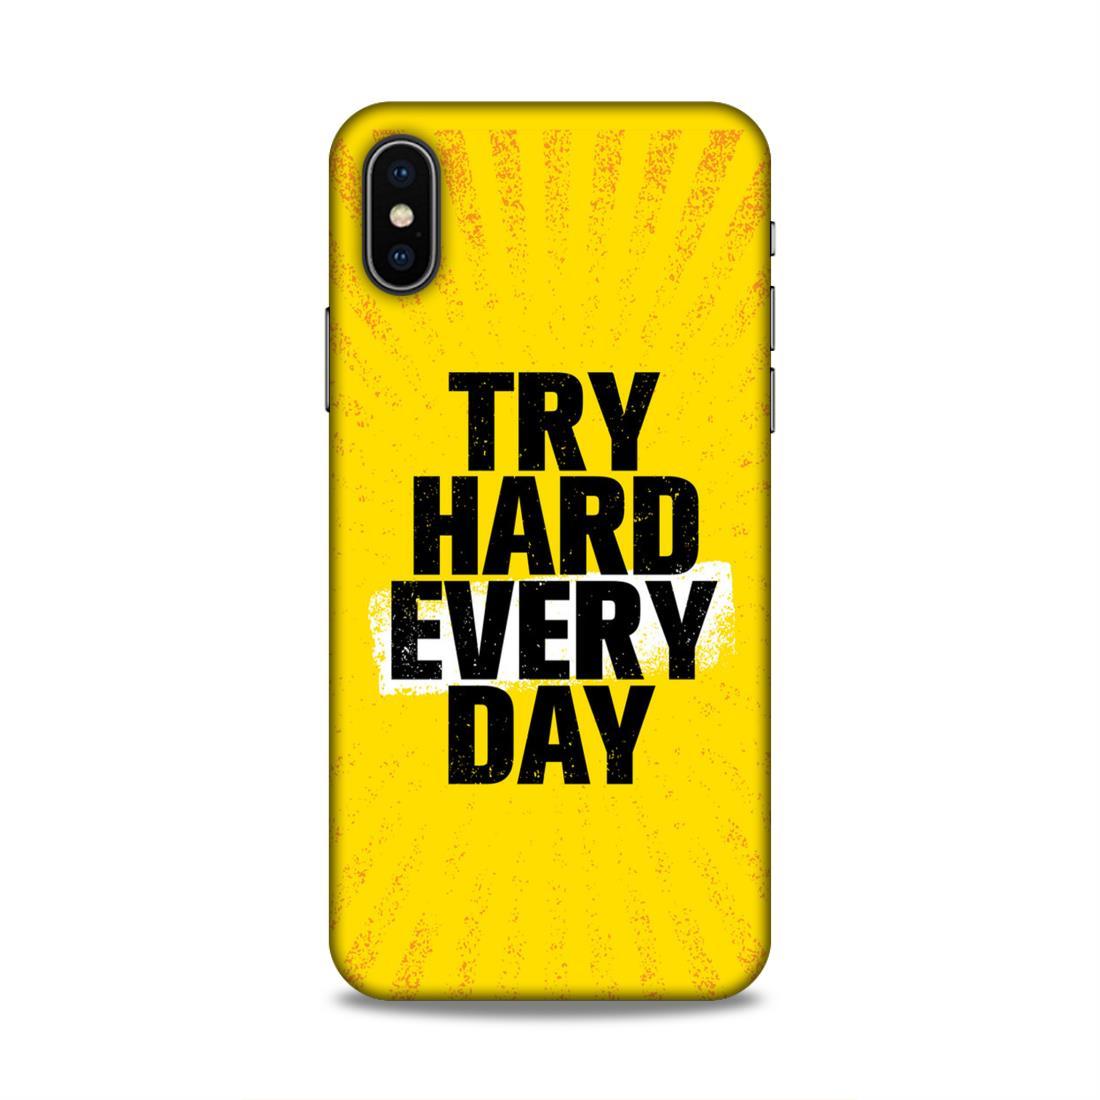 Try Hard Every Day iPhone XS Mobile Case Cover